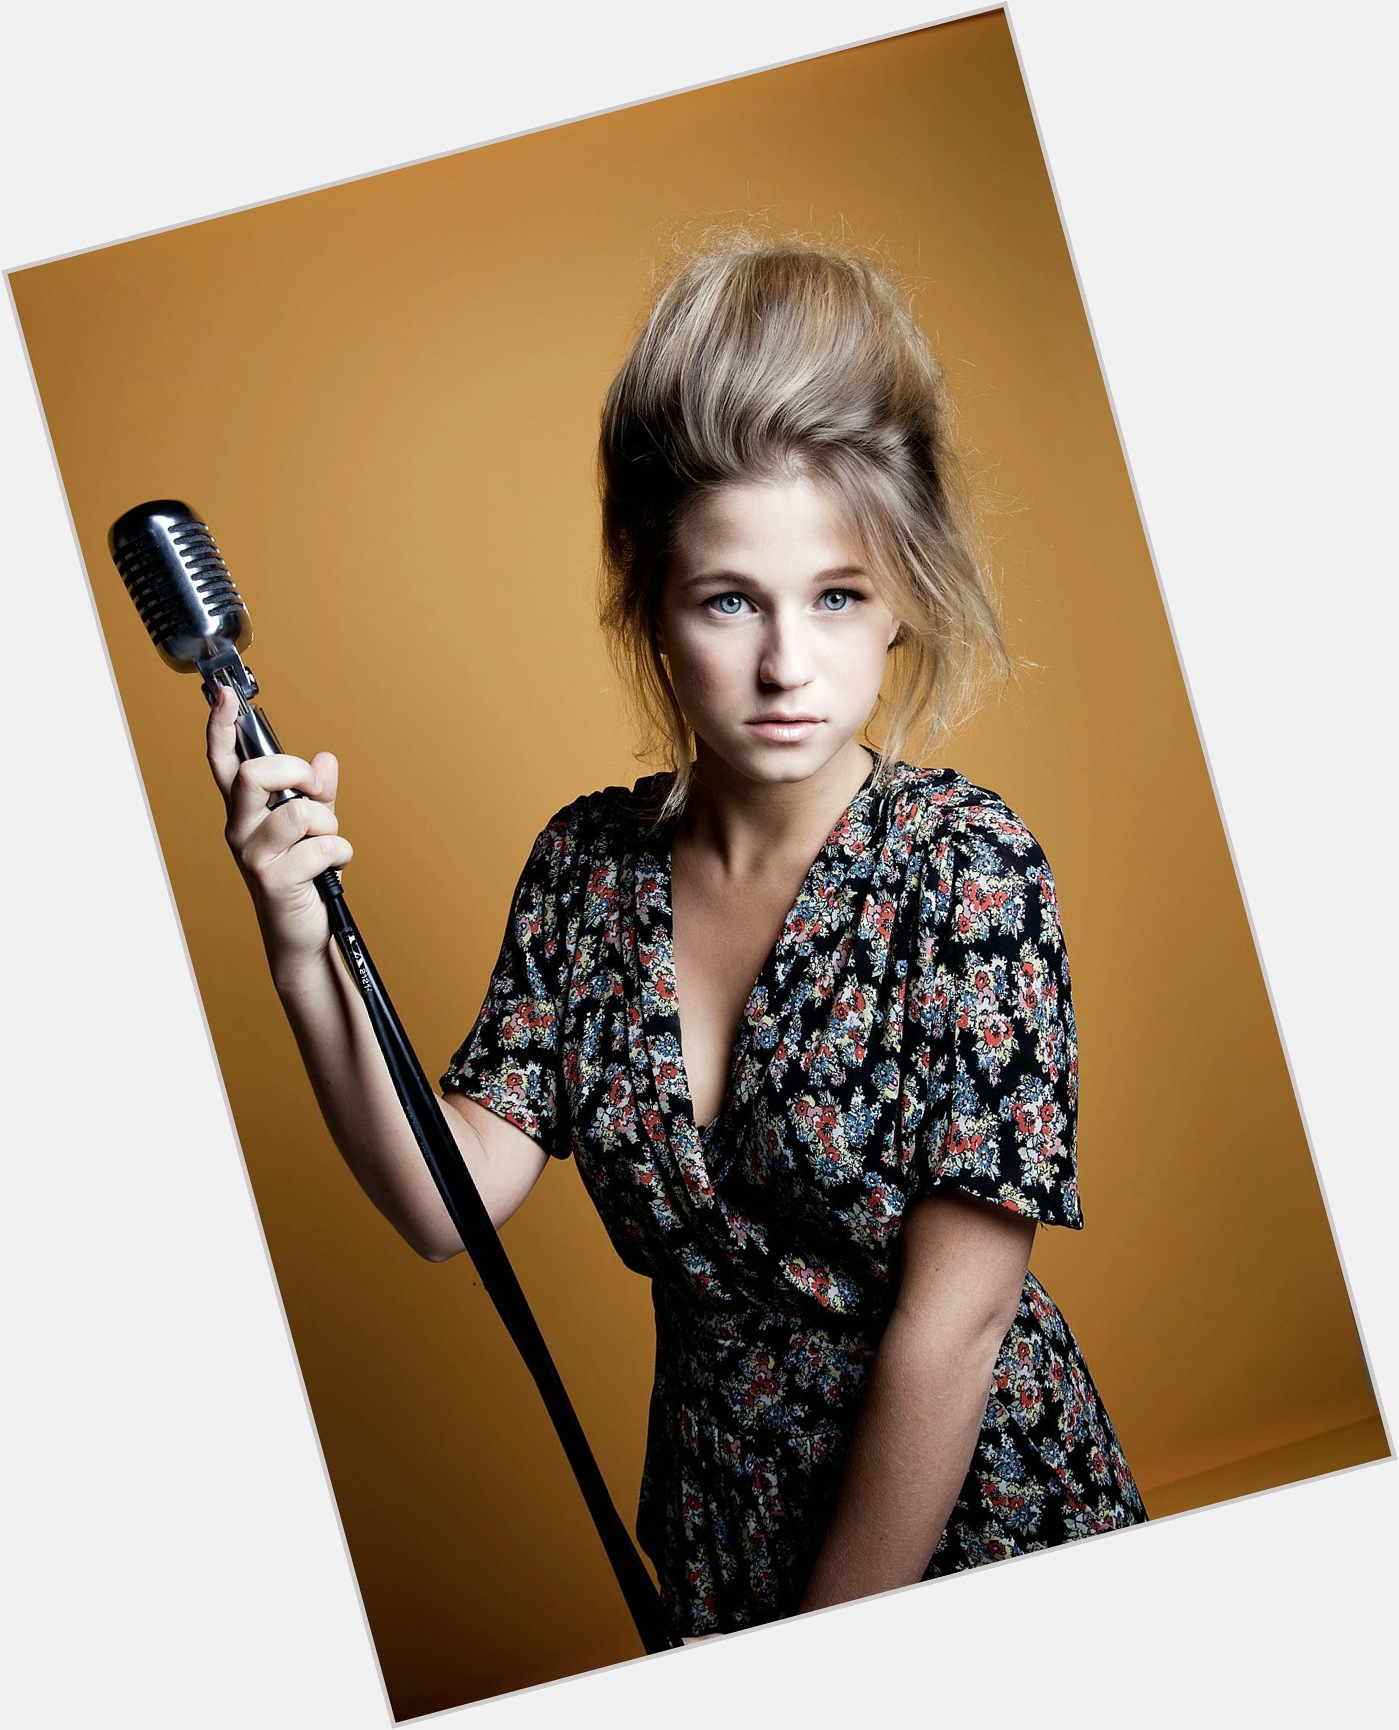 <a href="/hot-women/selah-sue/is-she-married-drugs-what-whispering-world-tall">Selah Sue</a> Slim body,  blonde hair & hairstyles